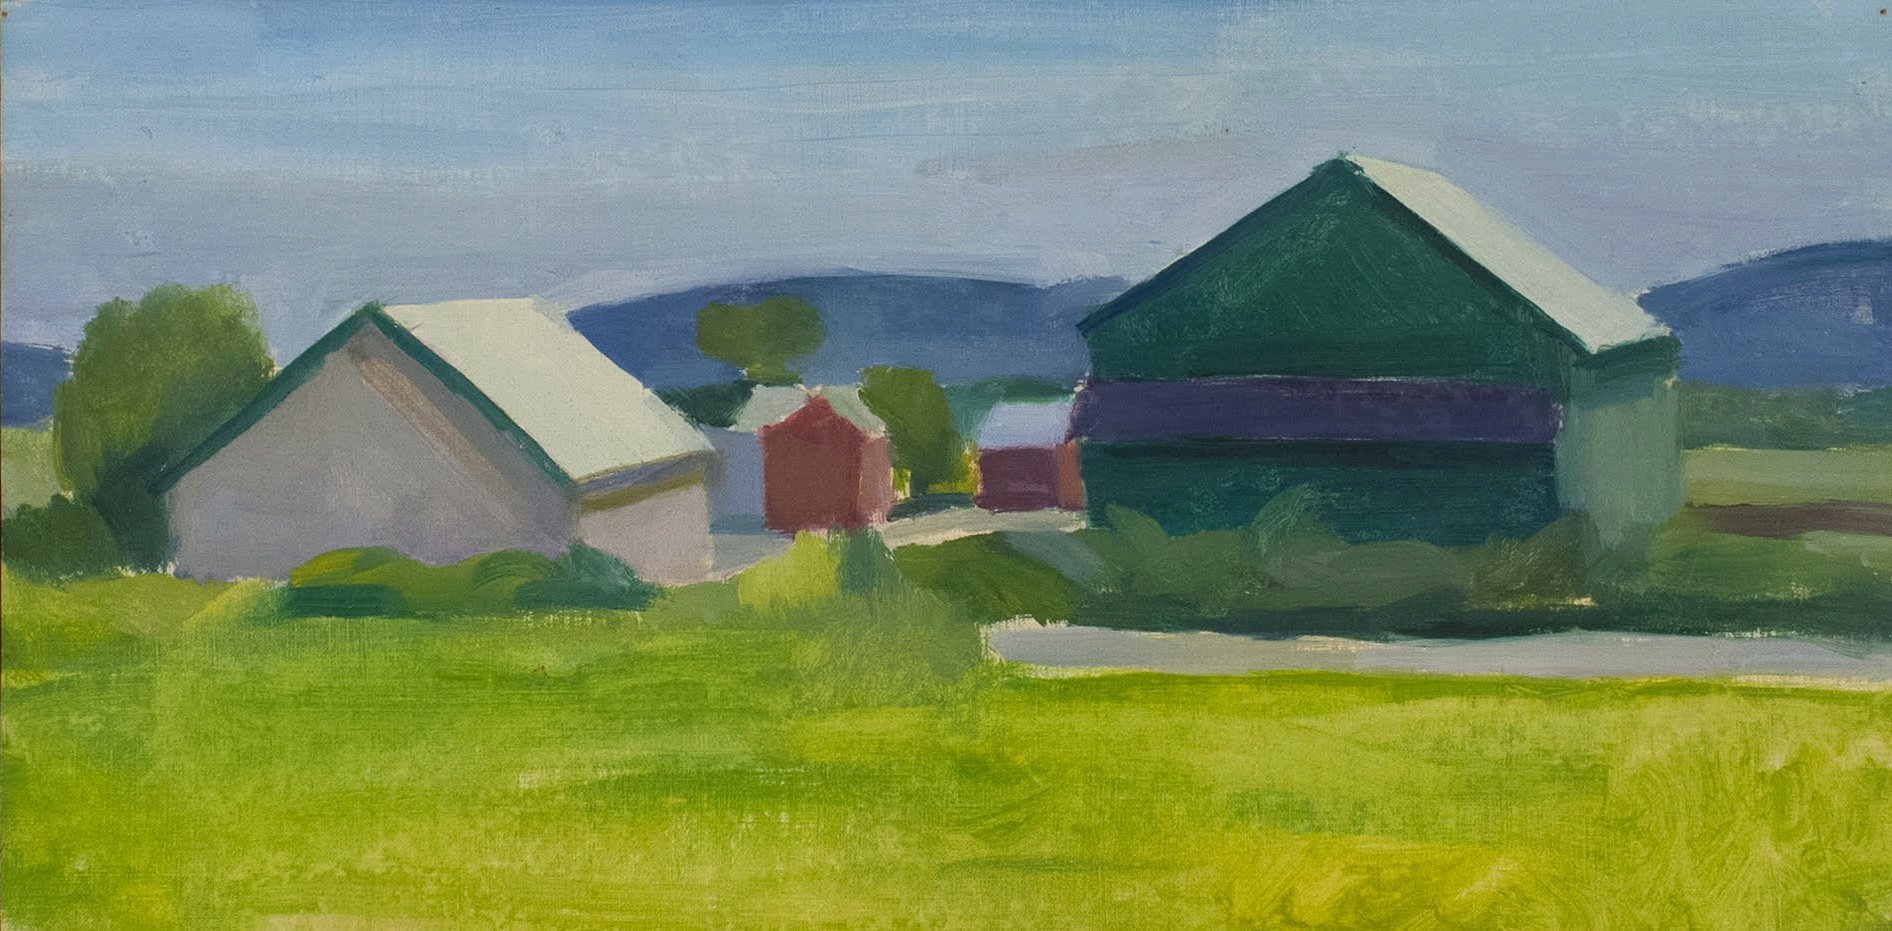   Green Barns , 1985, oil/paper, 7 x 13 in.  (Not for sale)  